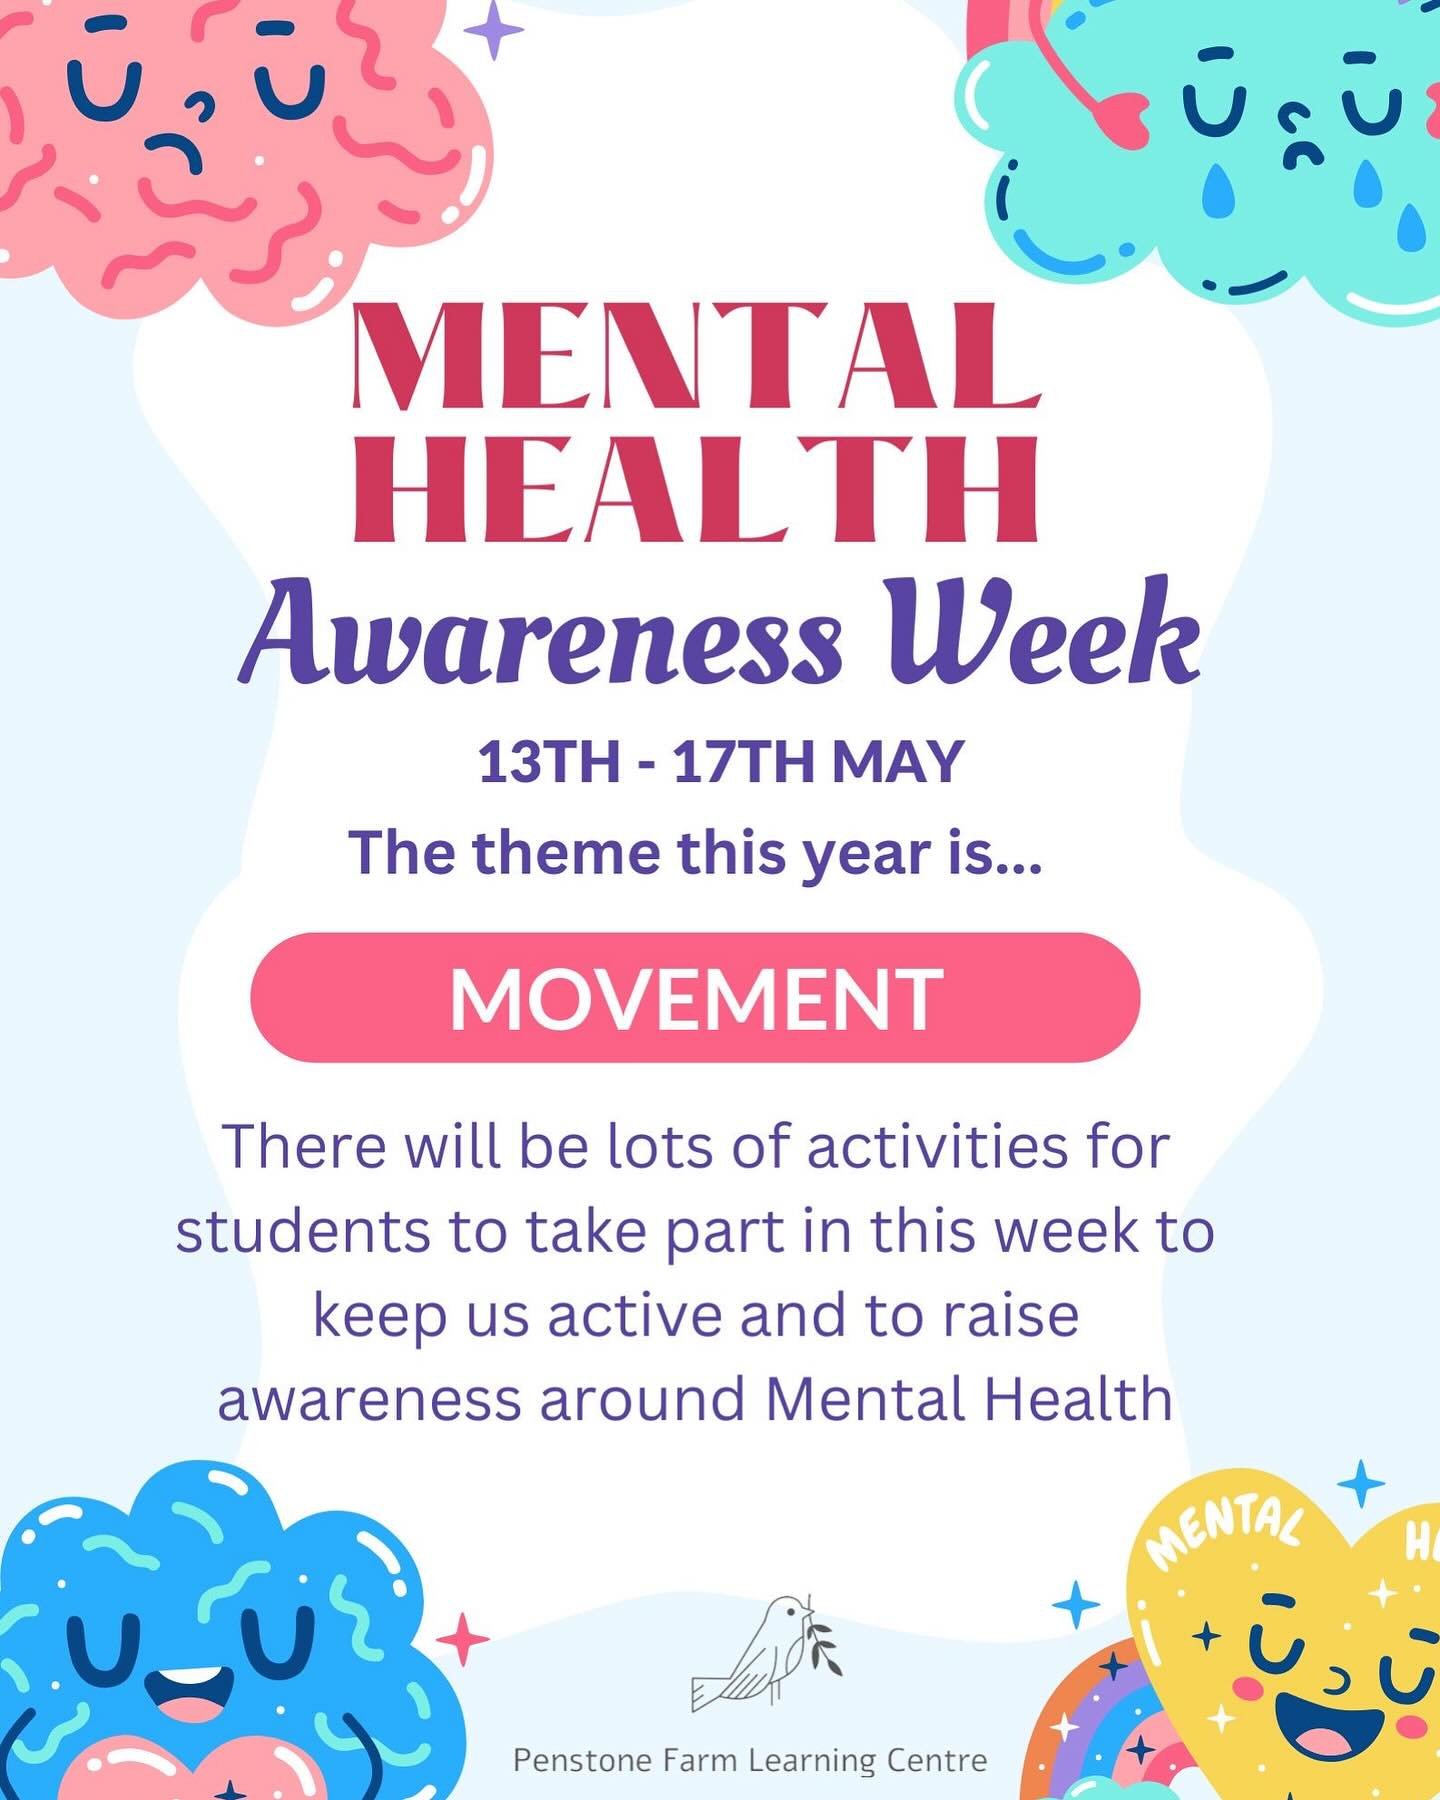 This week at Penstone is Mental Health Awareness Week and what better theme to have then Movement. There will be wake and shakes happening, walks, sports, rainbow breathing and yoga for students to take part in as well as the usual outdoor activities